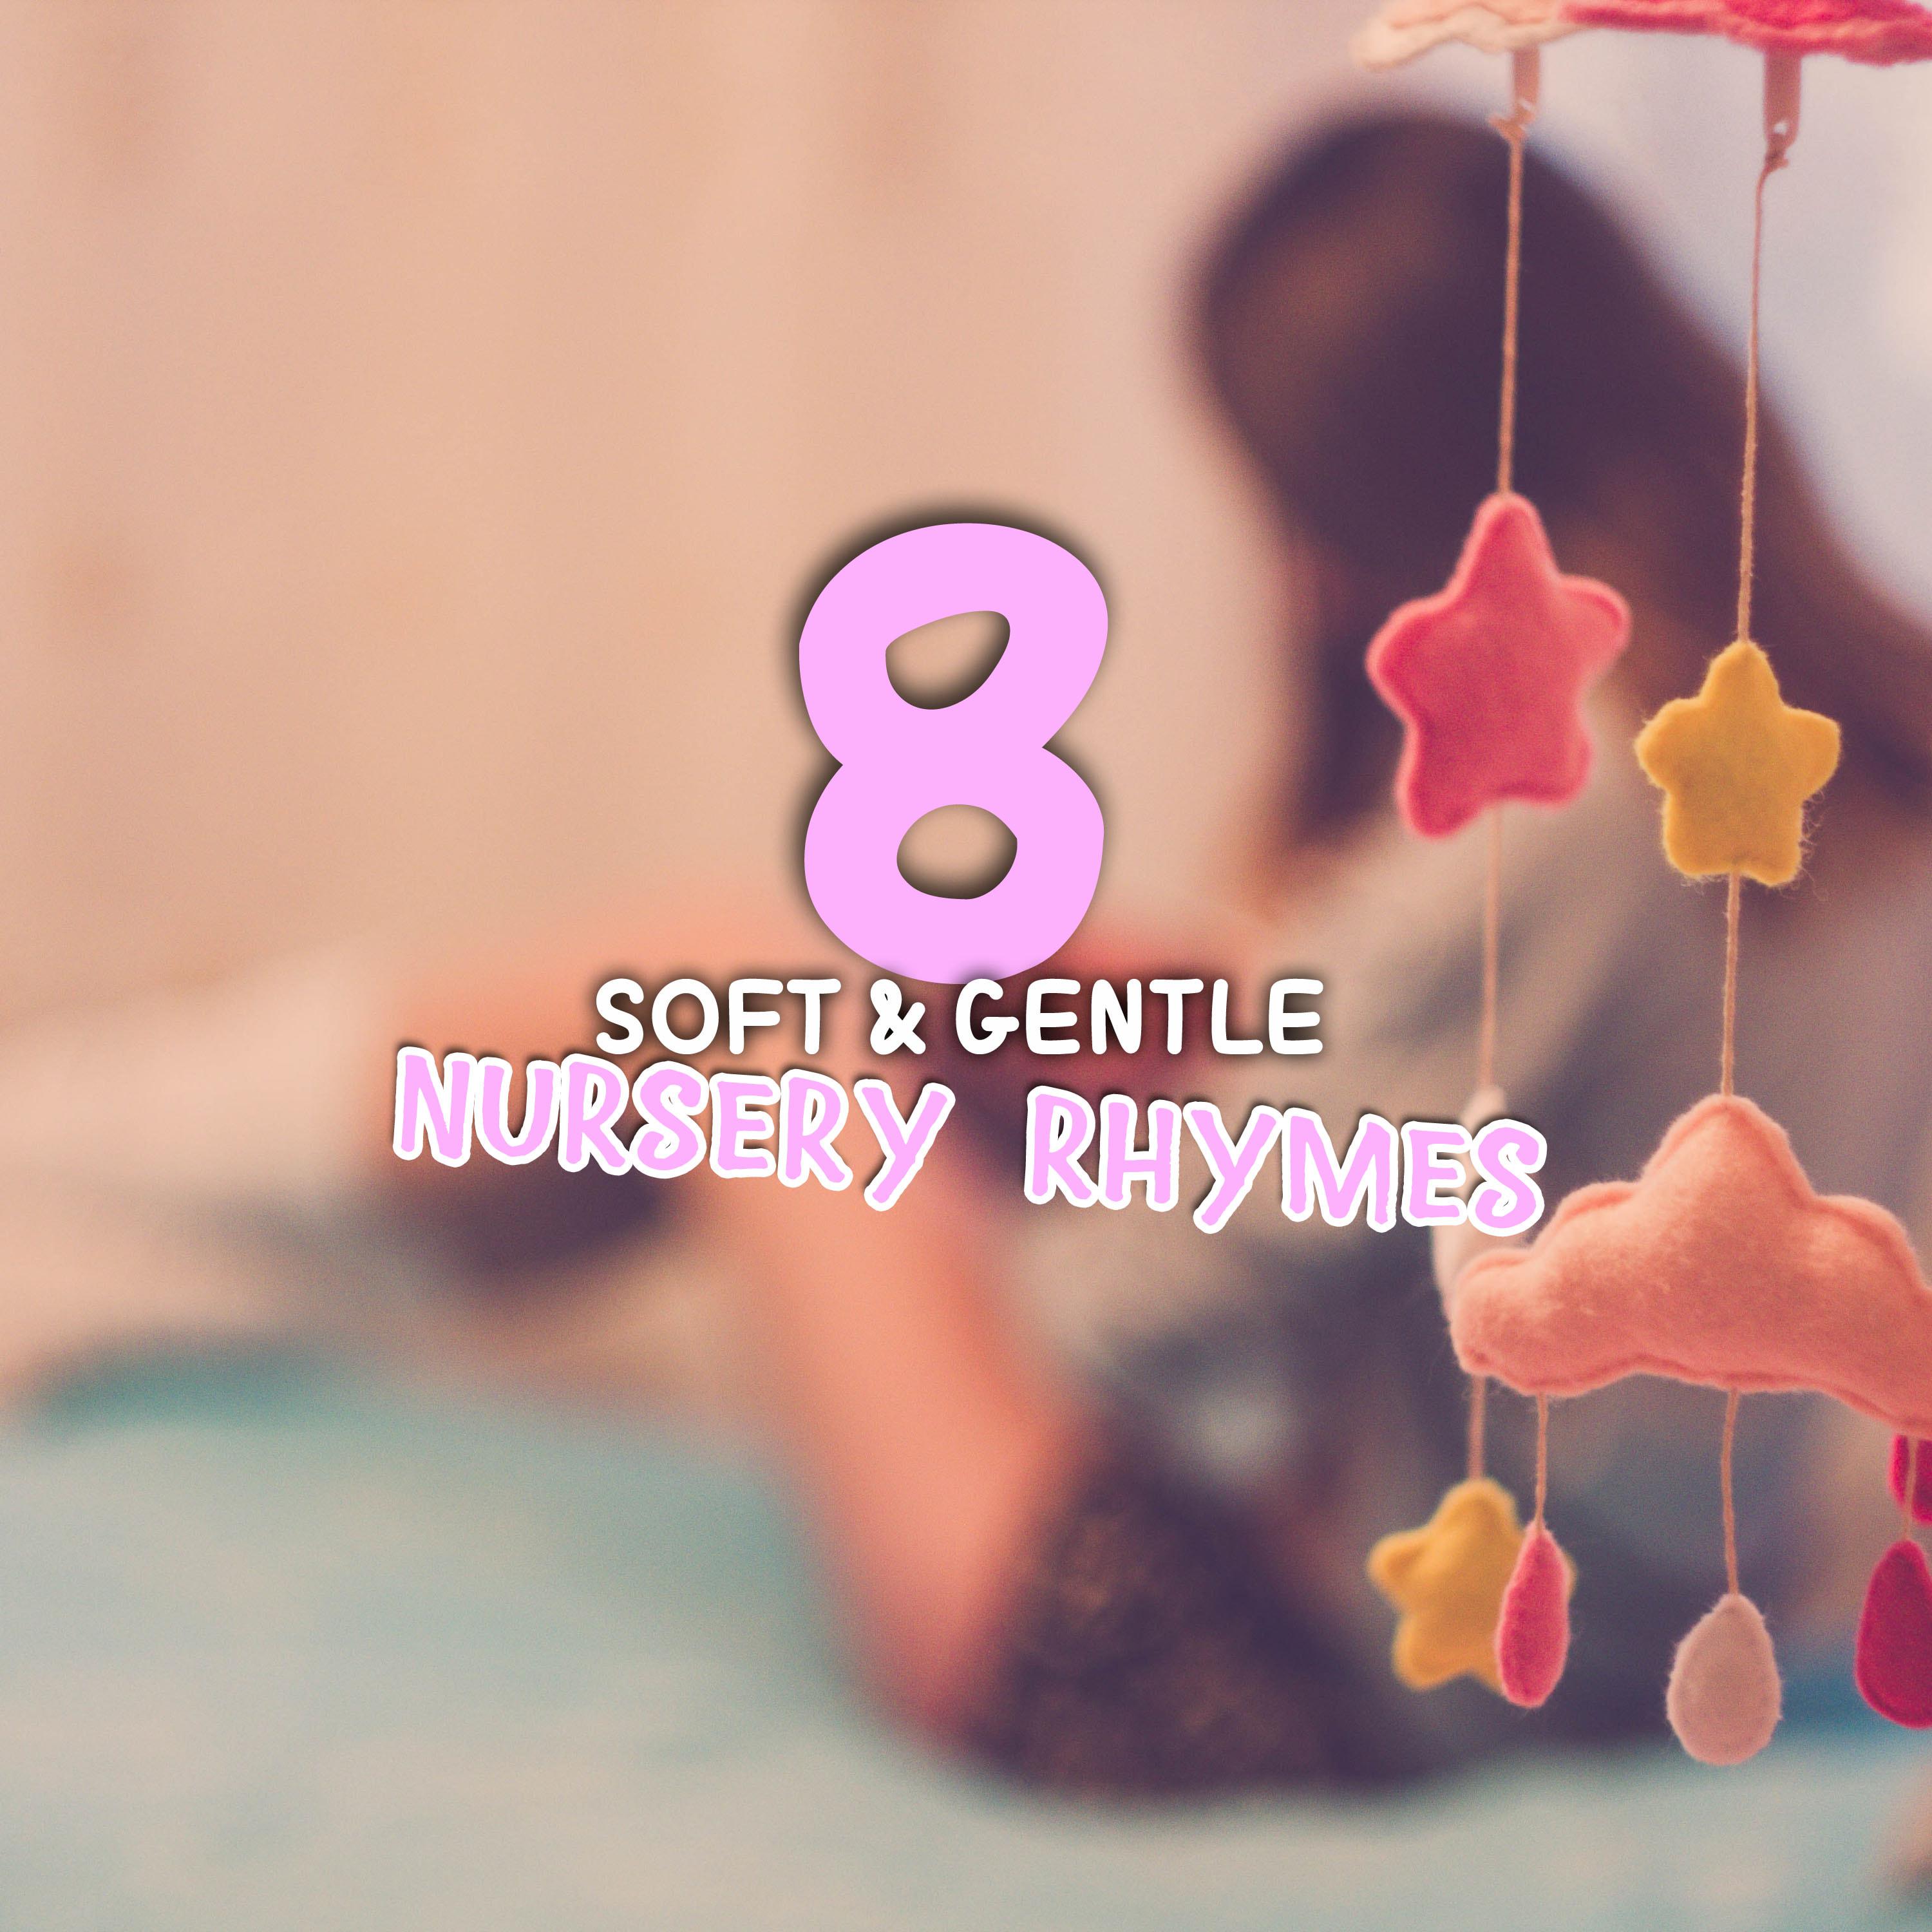 #8 Soft & Gentle Nursery Rhymes for Sleeping through the Night to